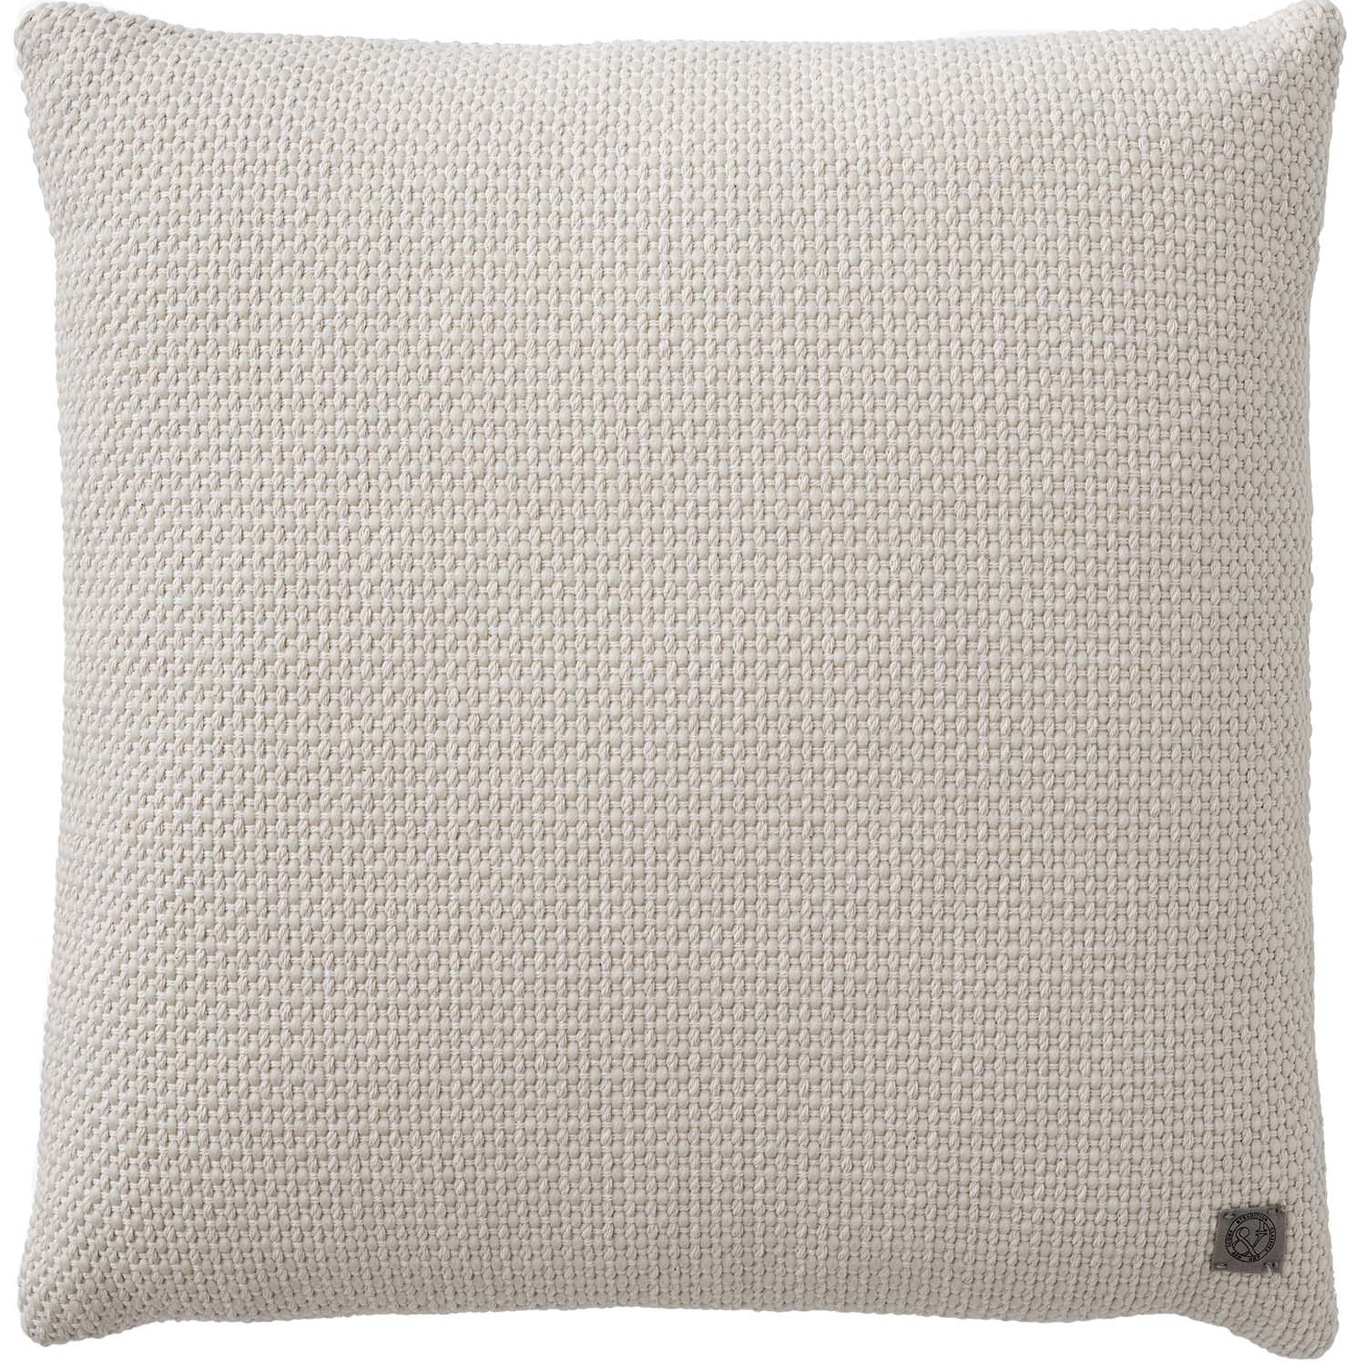 Collect SC28 Cushion 50x50 cm, Weave/Coco